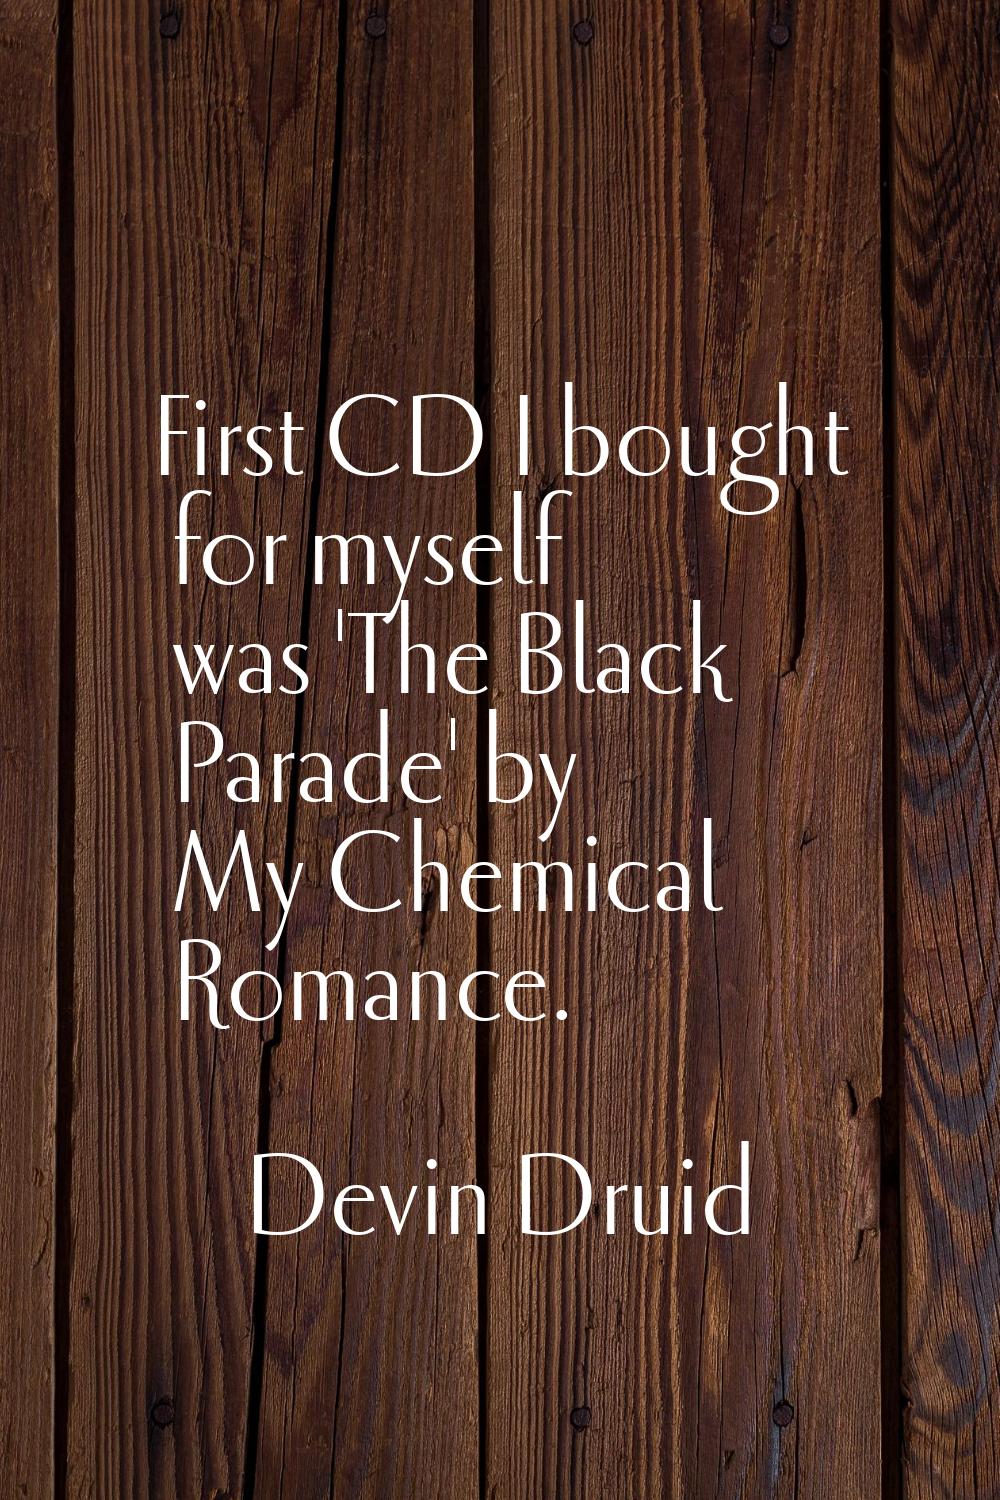 First CD I bought for myself was 'The Black Parade' by My Chemical Romance.